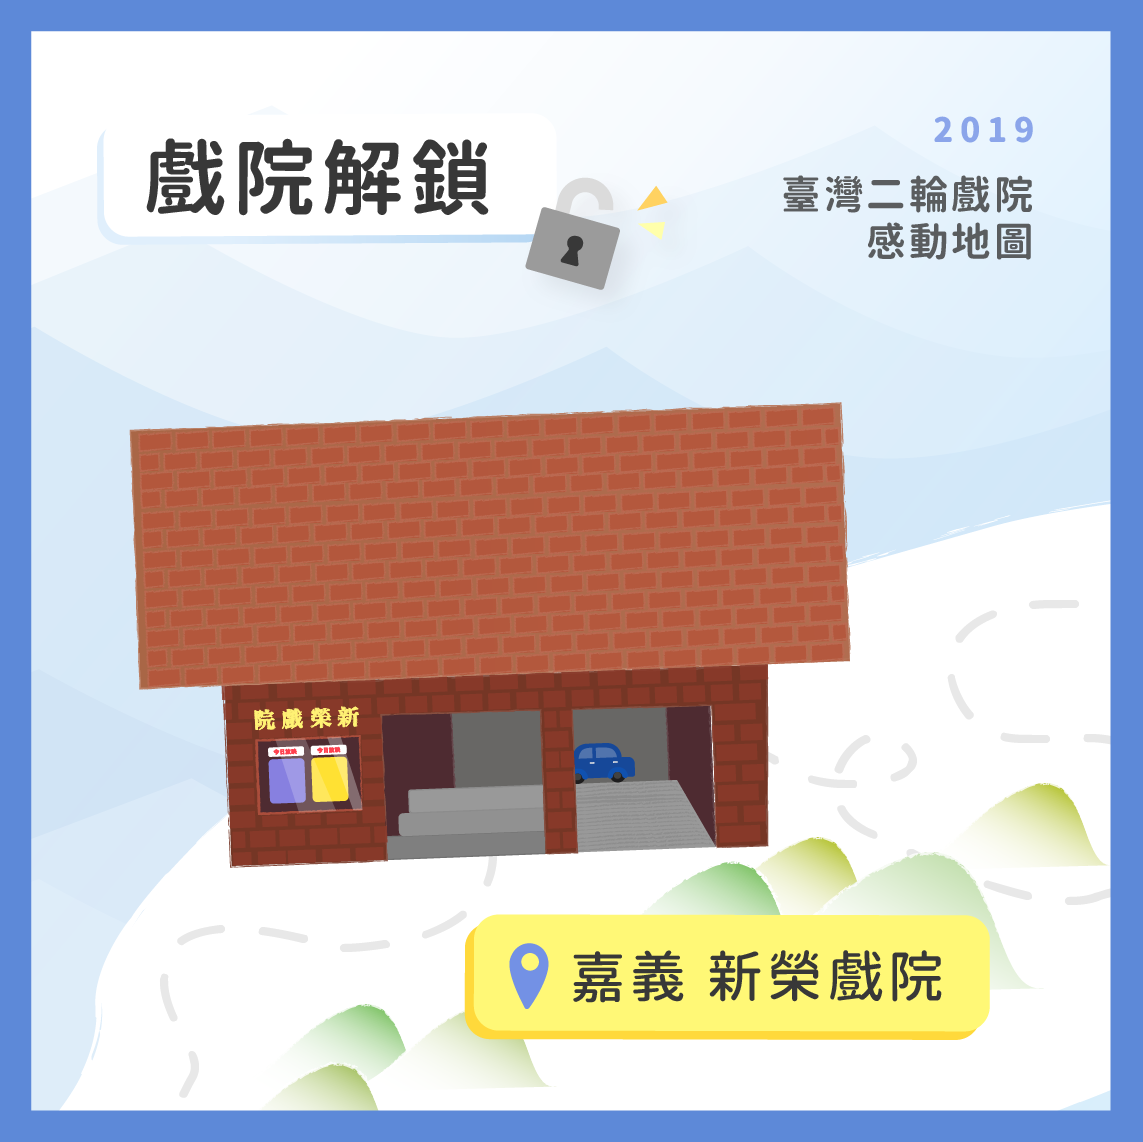 taiwan theater  ILLUSTRATION  bethere 二輪 戲院 插畫